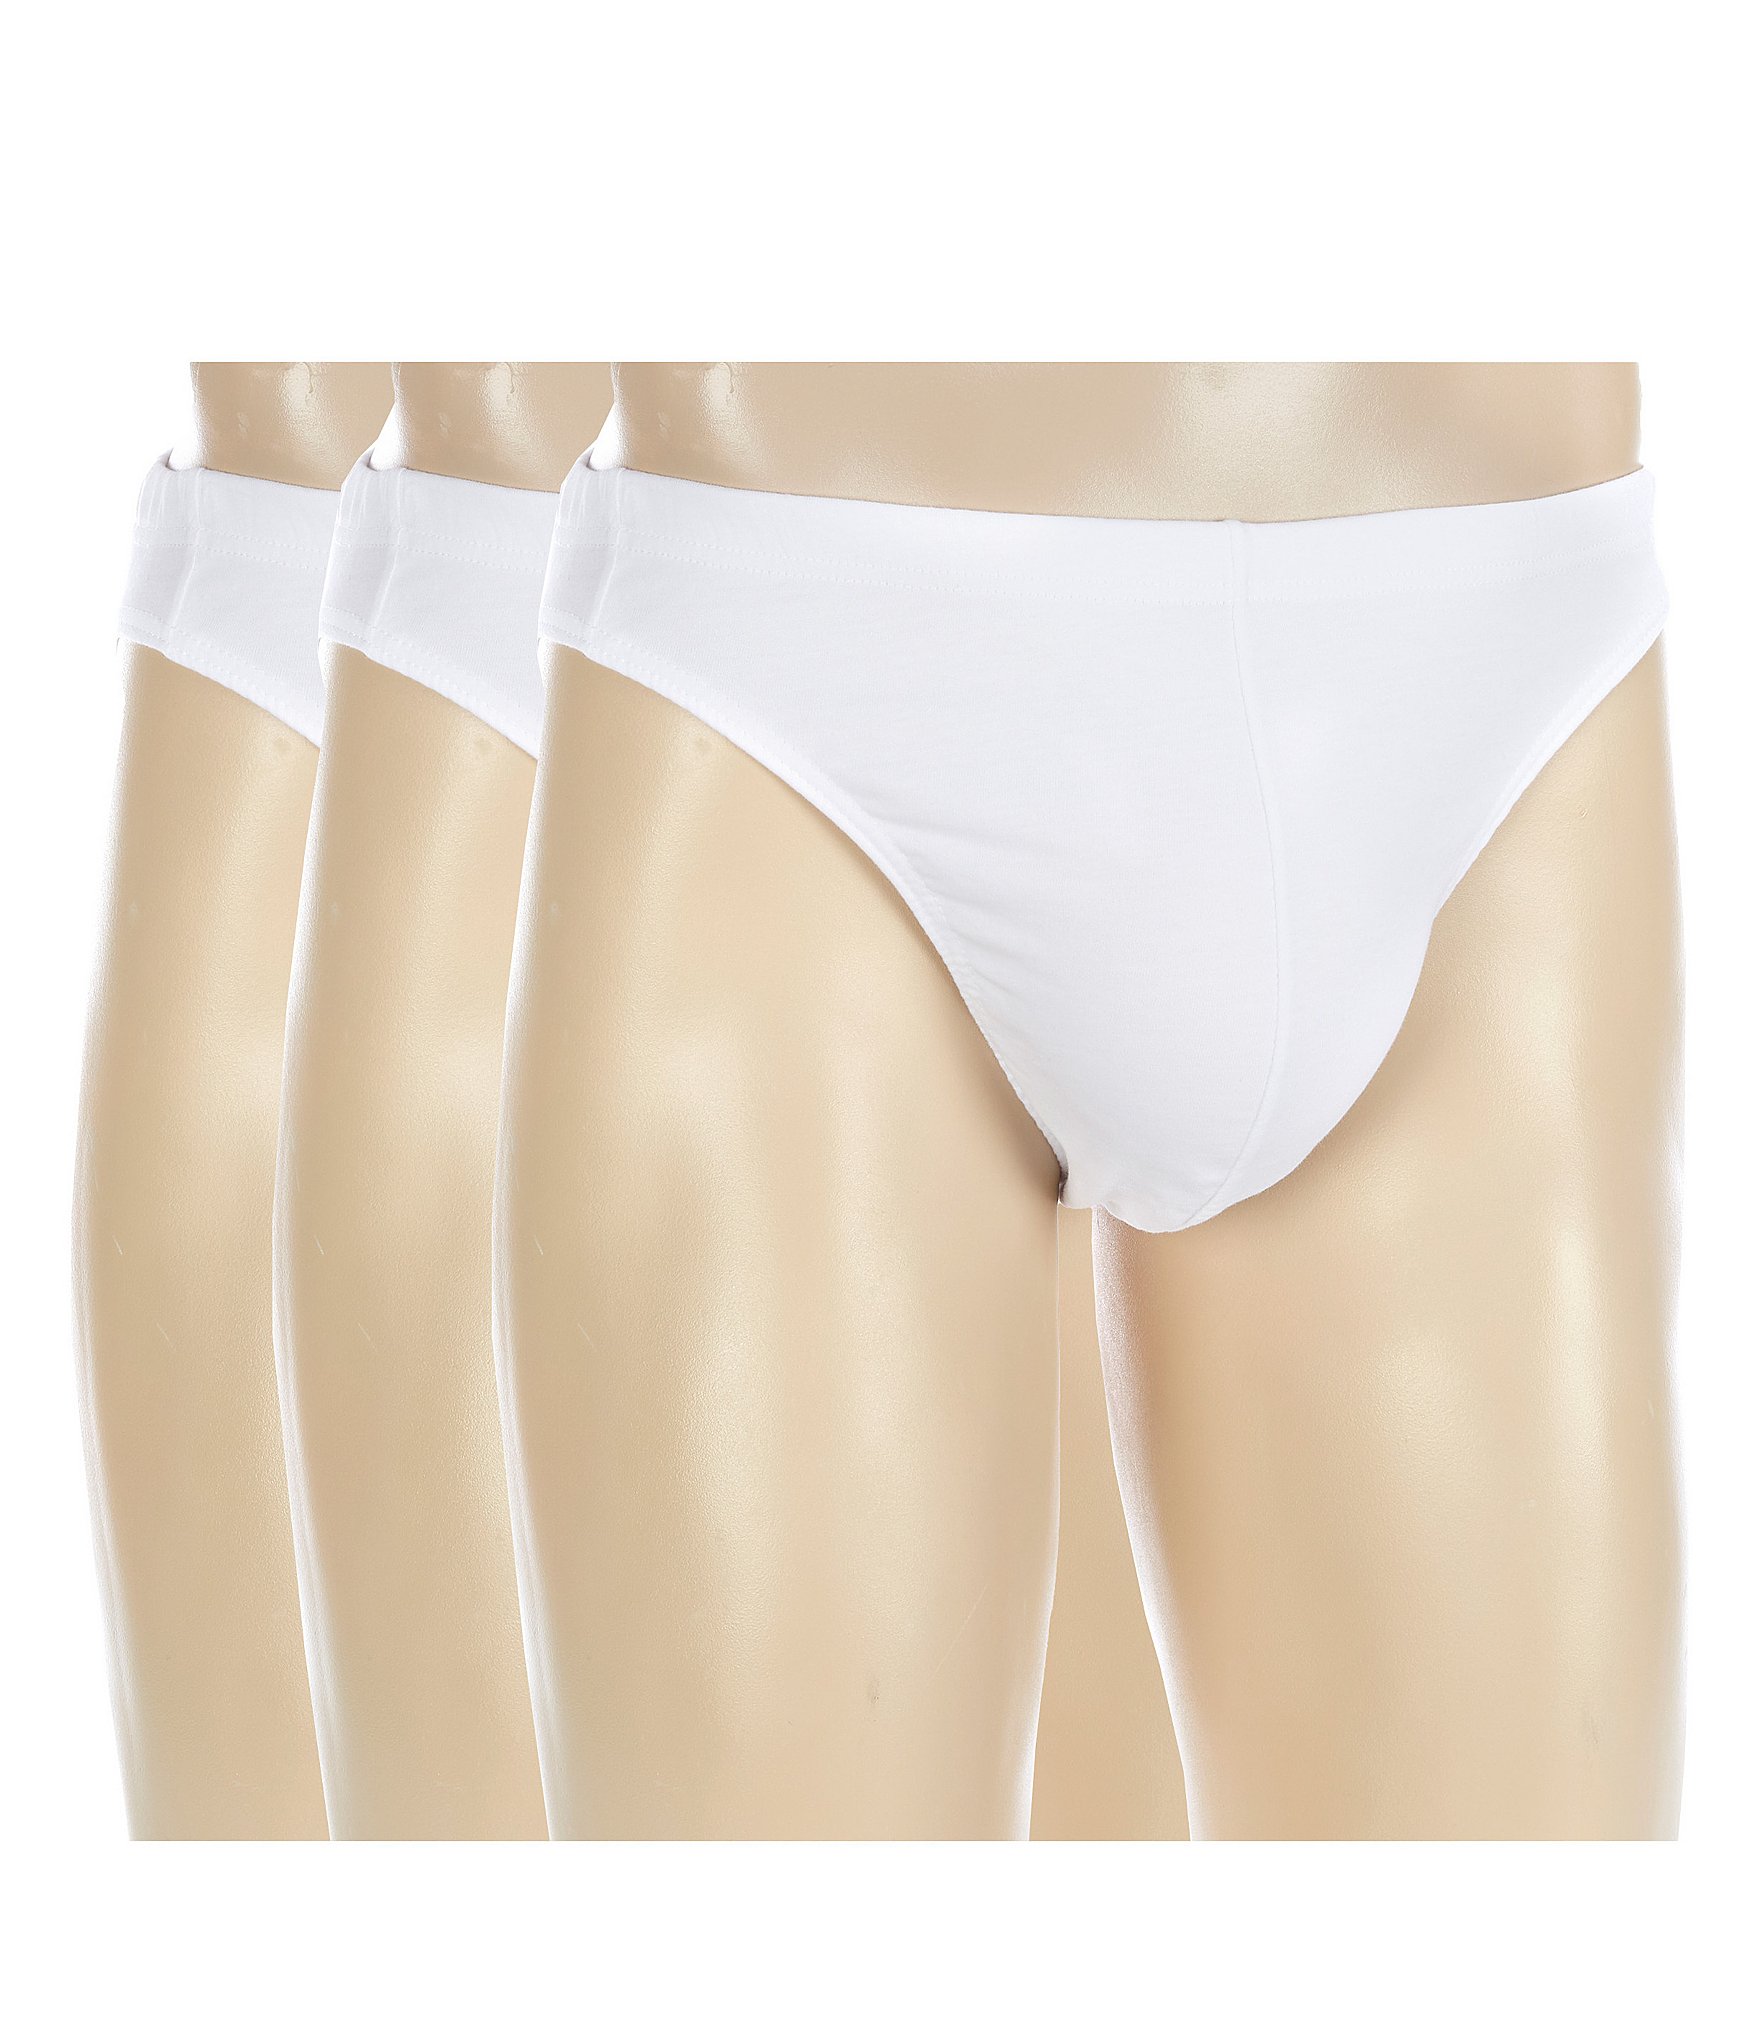 Low-rise Bikini Briefs in off-white with ivory embroidery - La